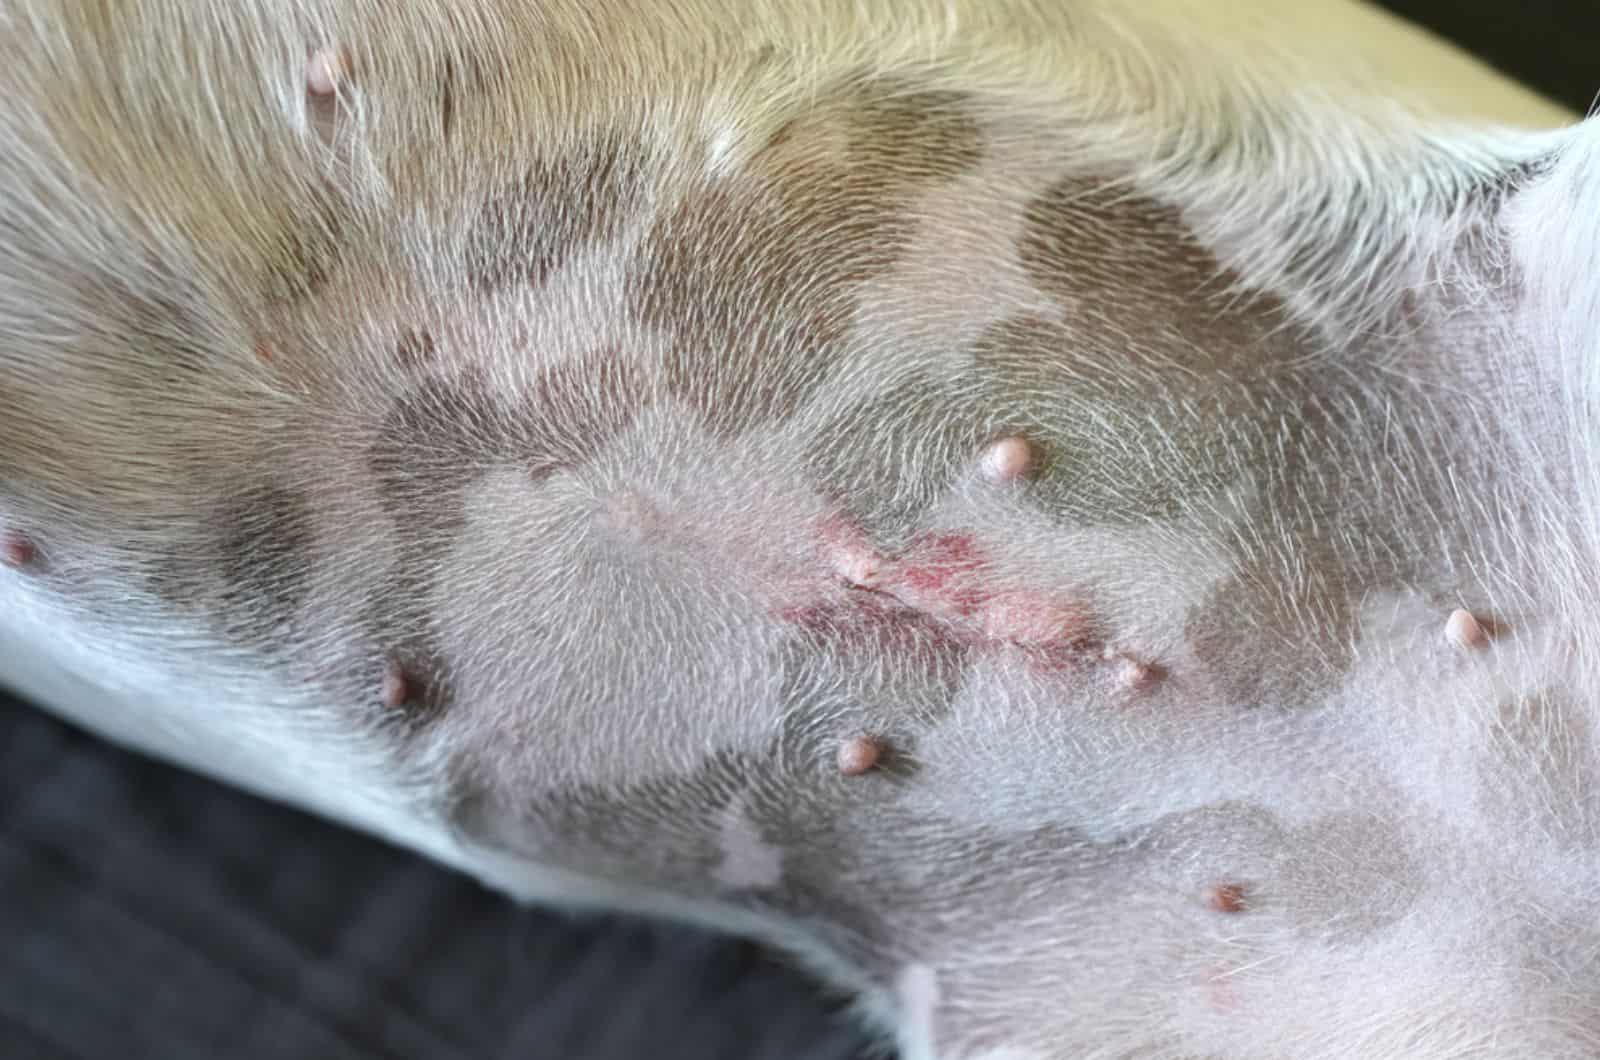 scar after spay operation visible